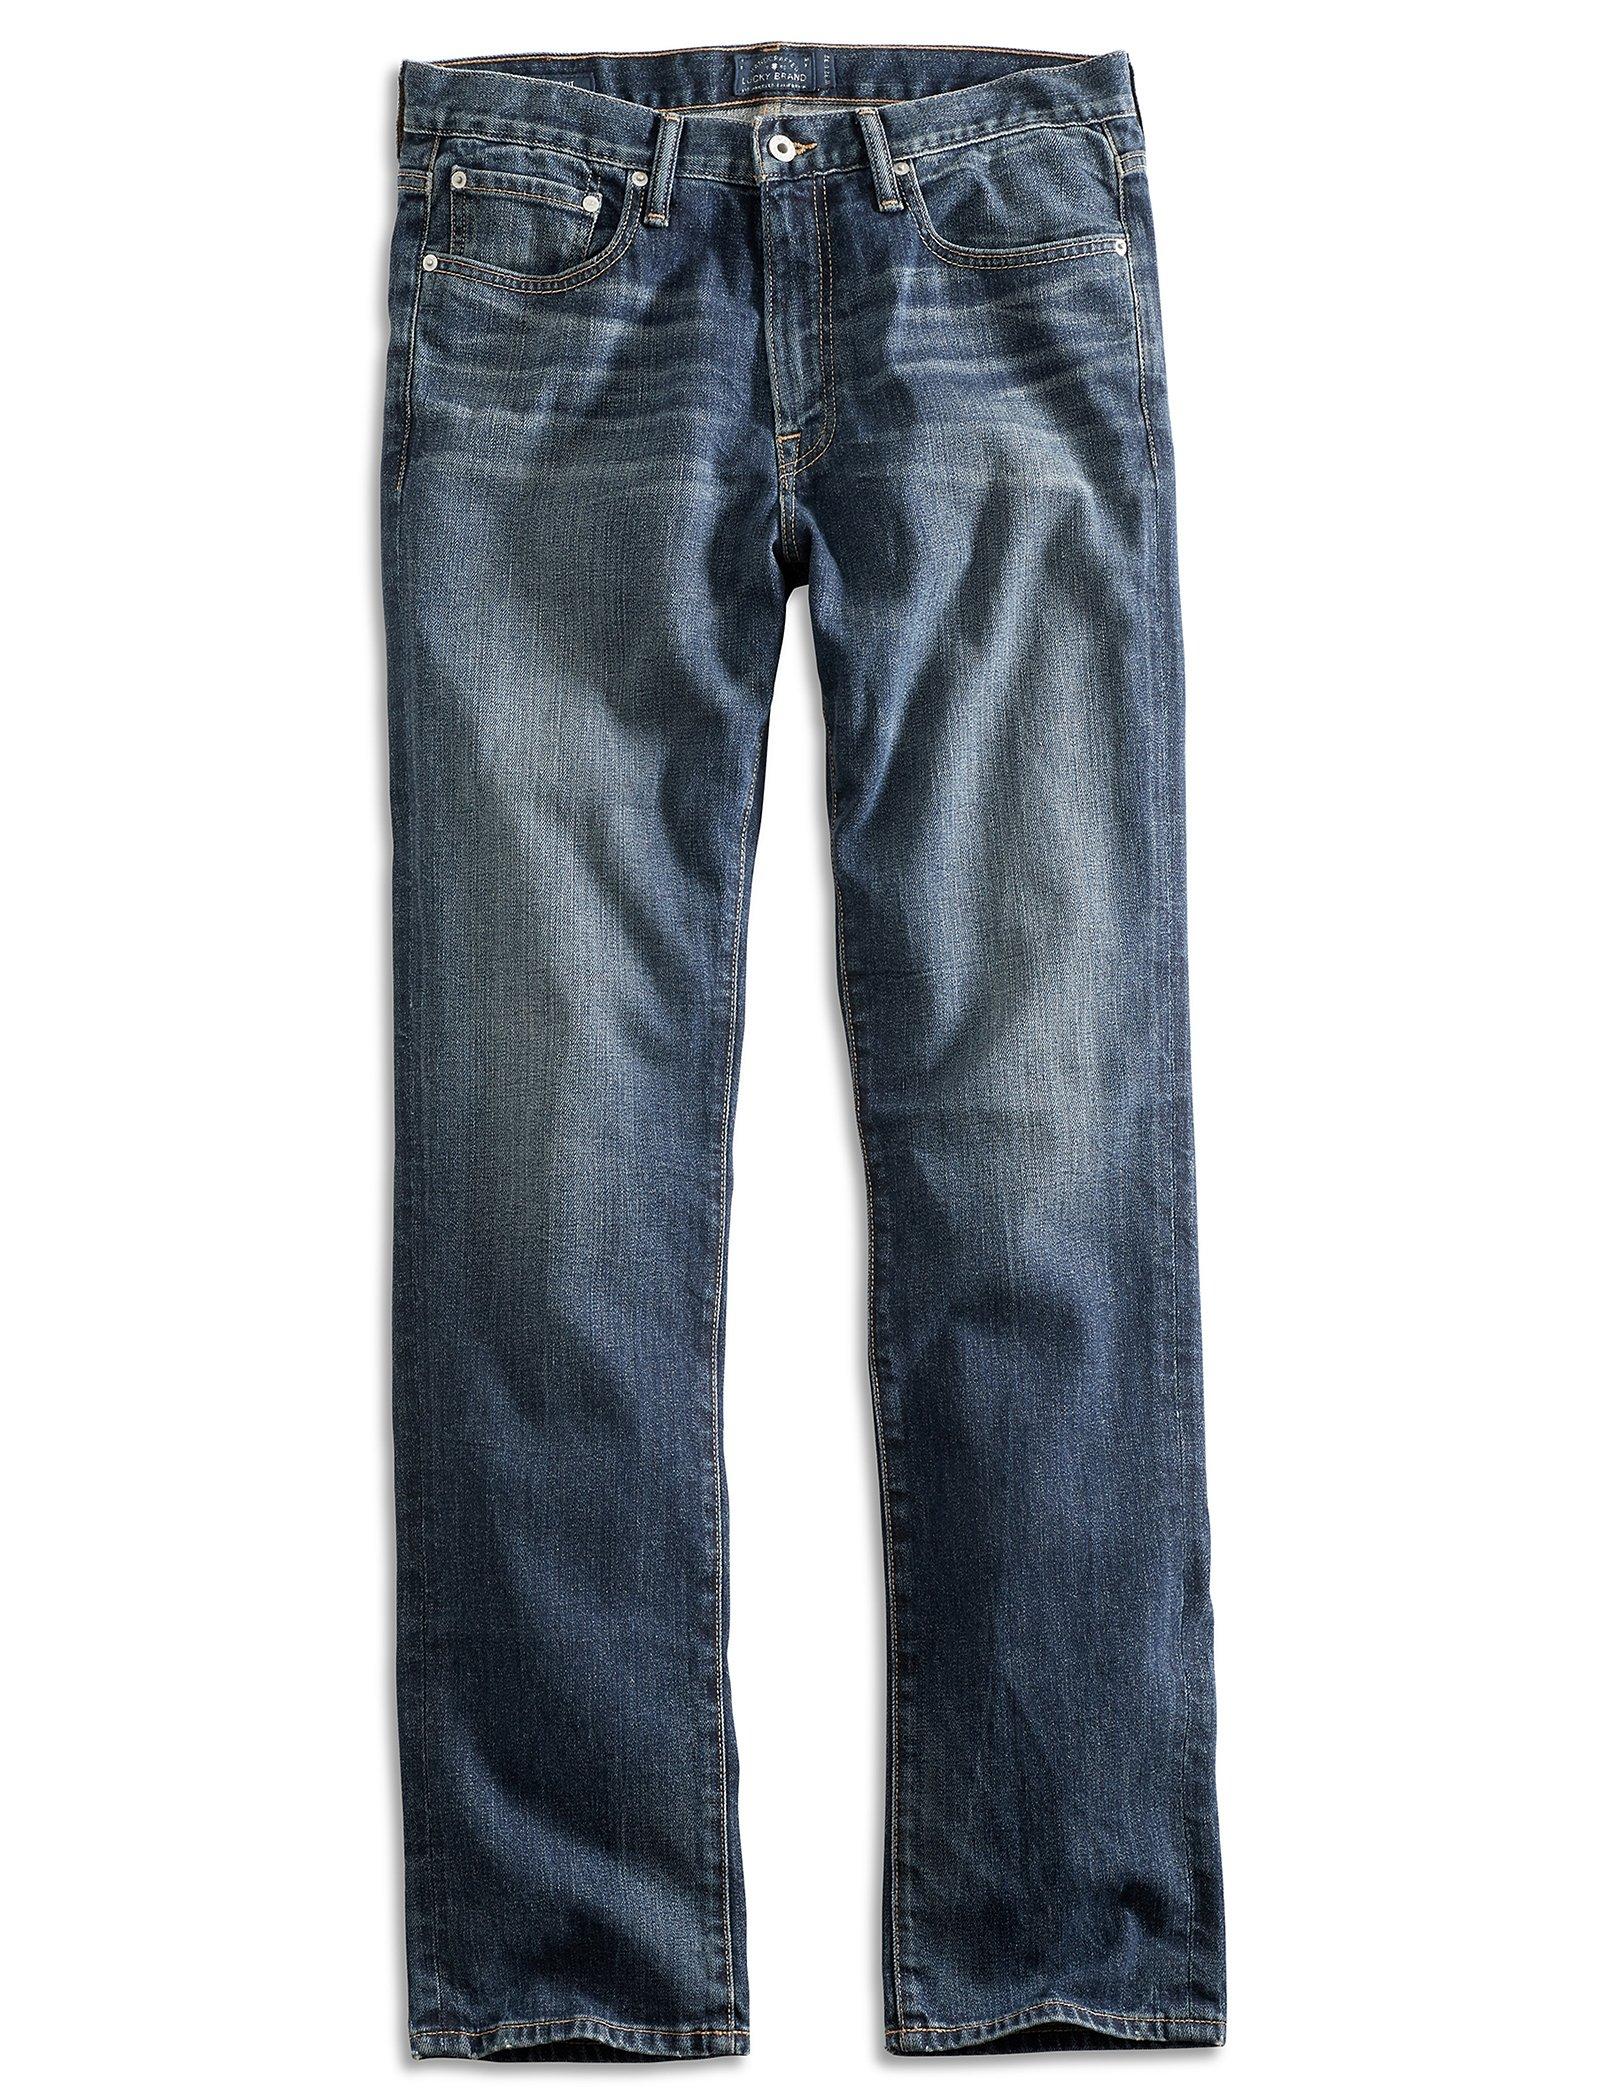 lucky brand 410 athletic fit jeans